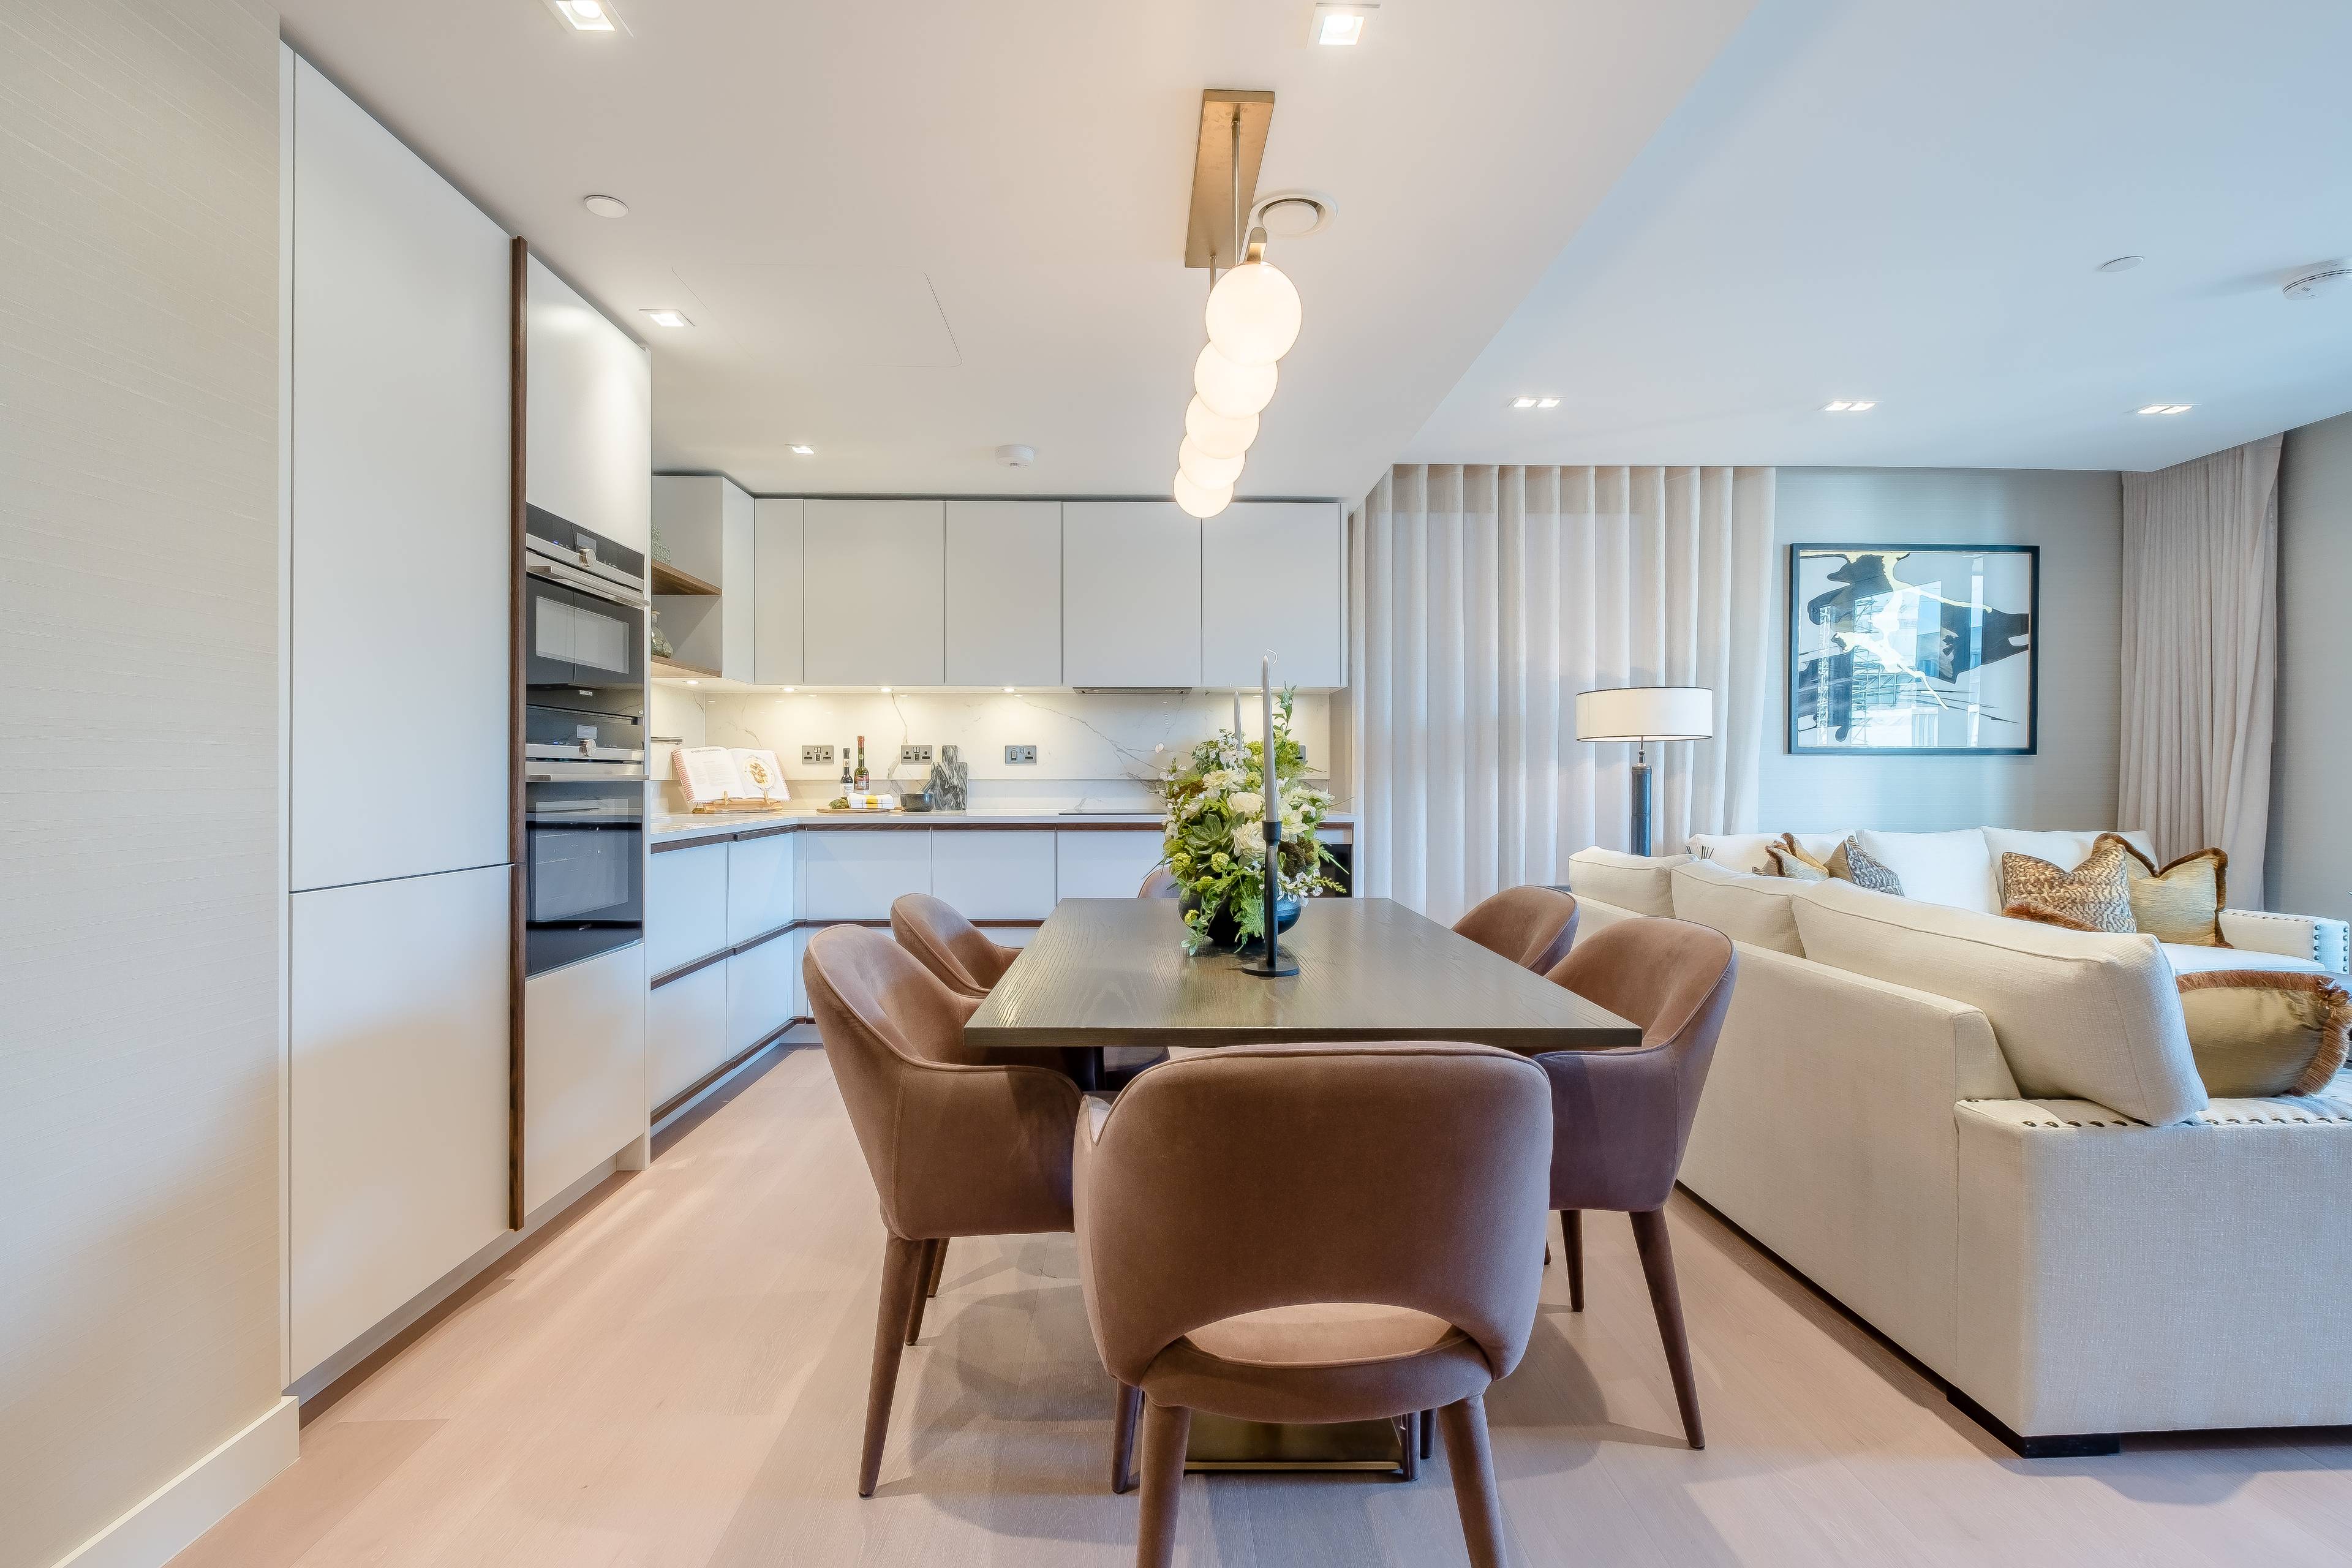 Contemporary three bedroom apartment at newly built Garrett Mansions boasting first class amenities situated moments away from fashionable Marylebone and Little Venice.